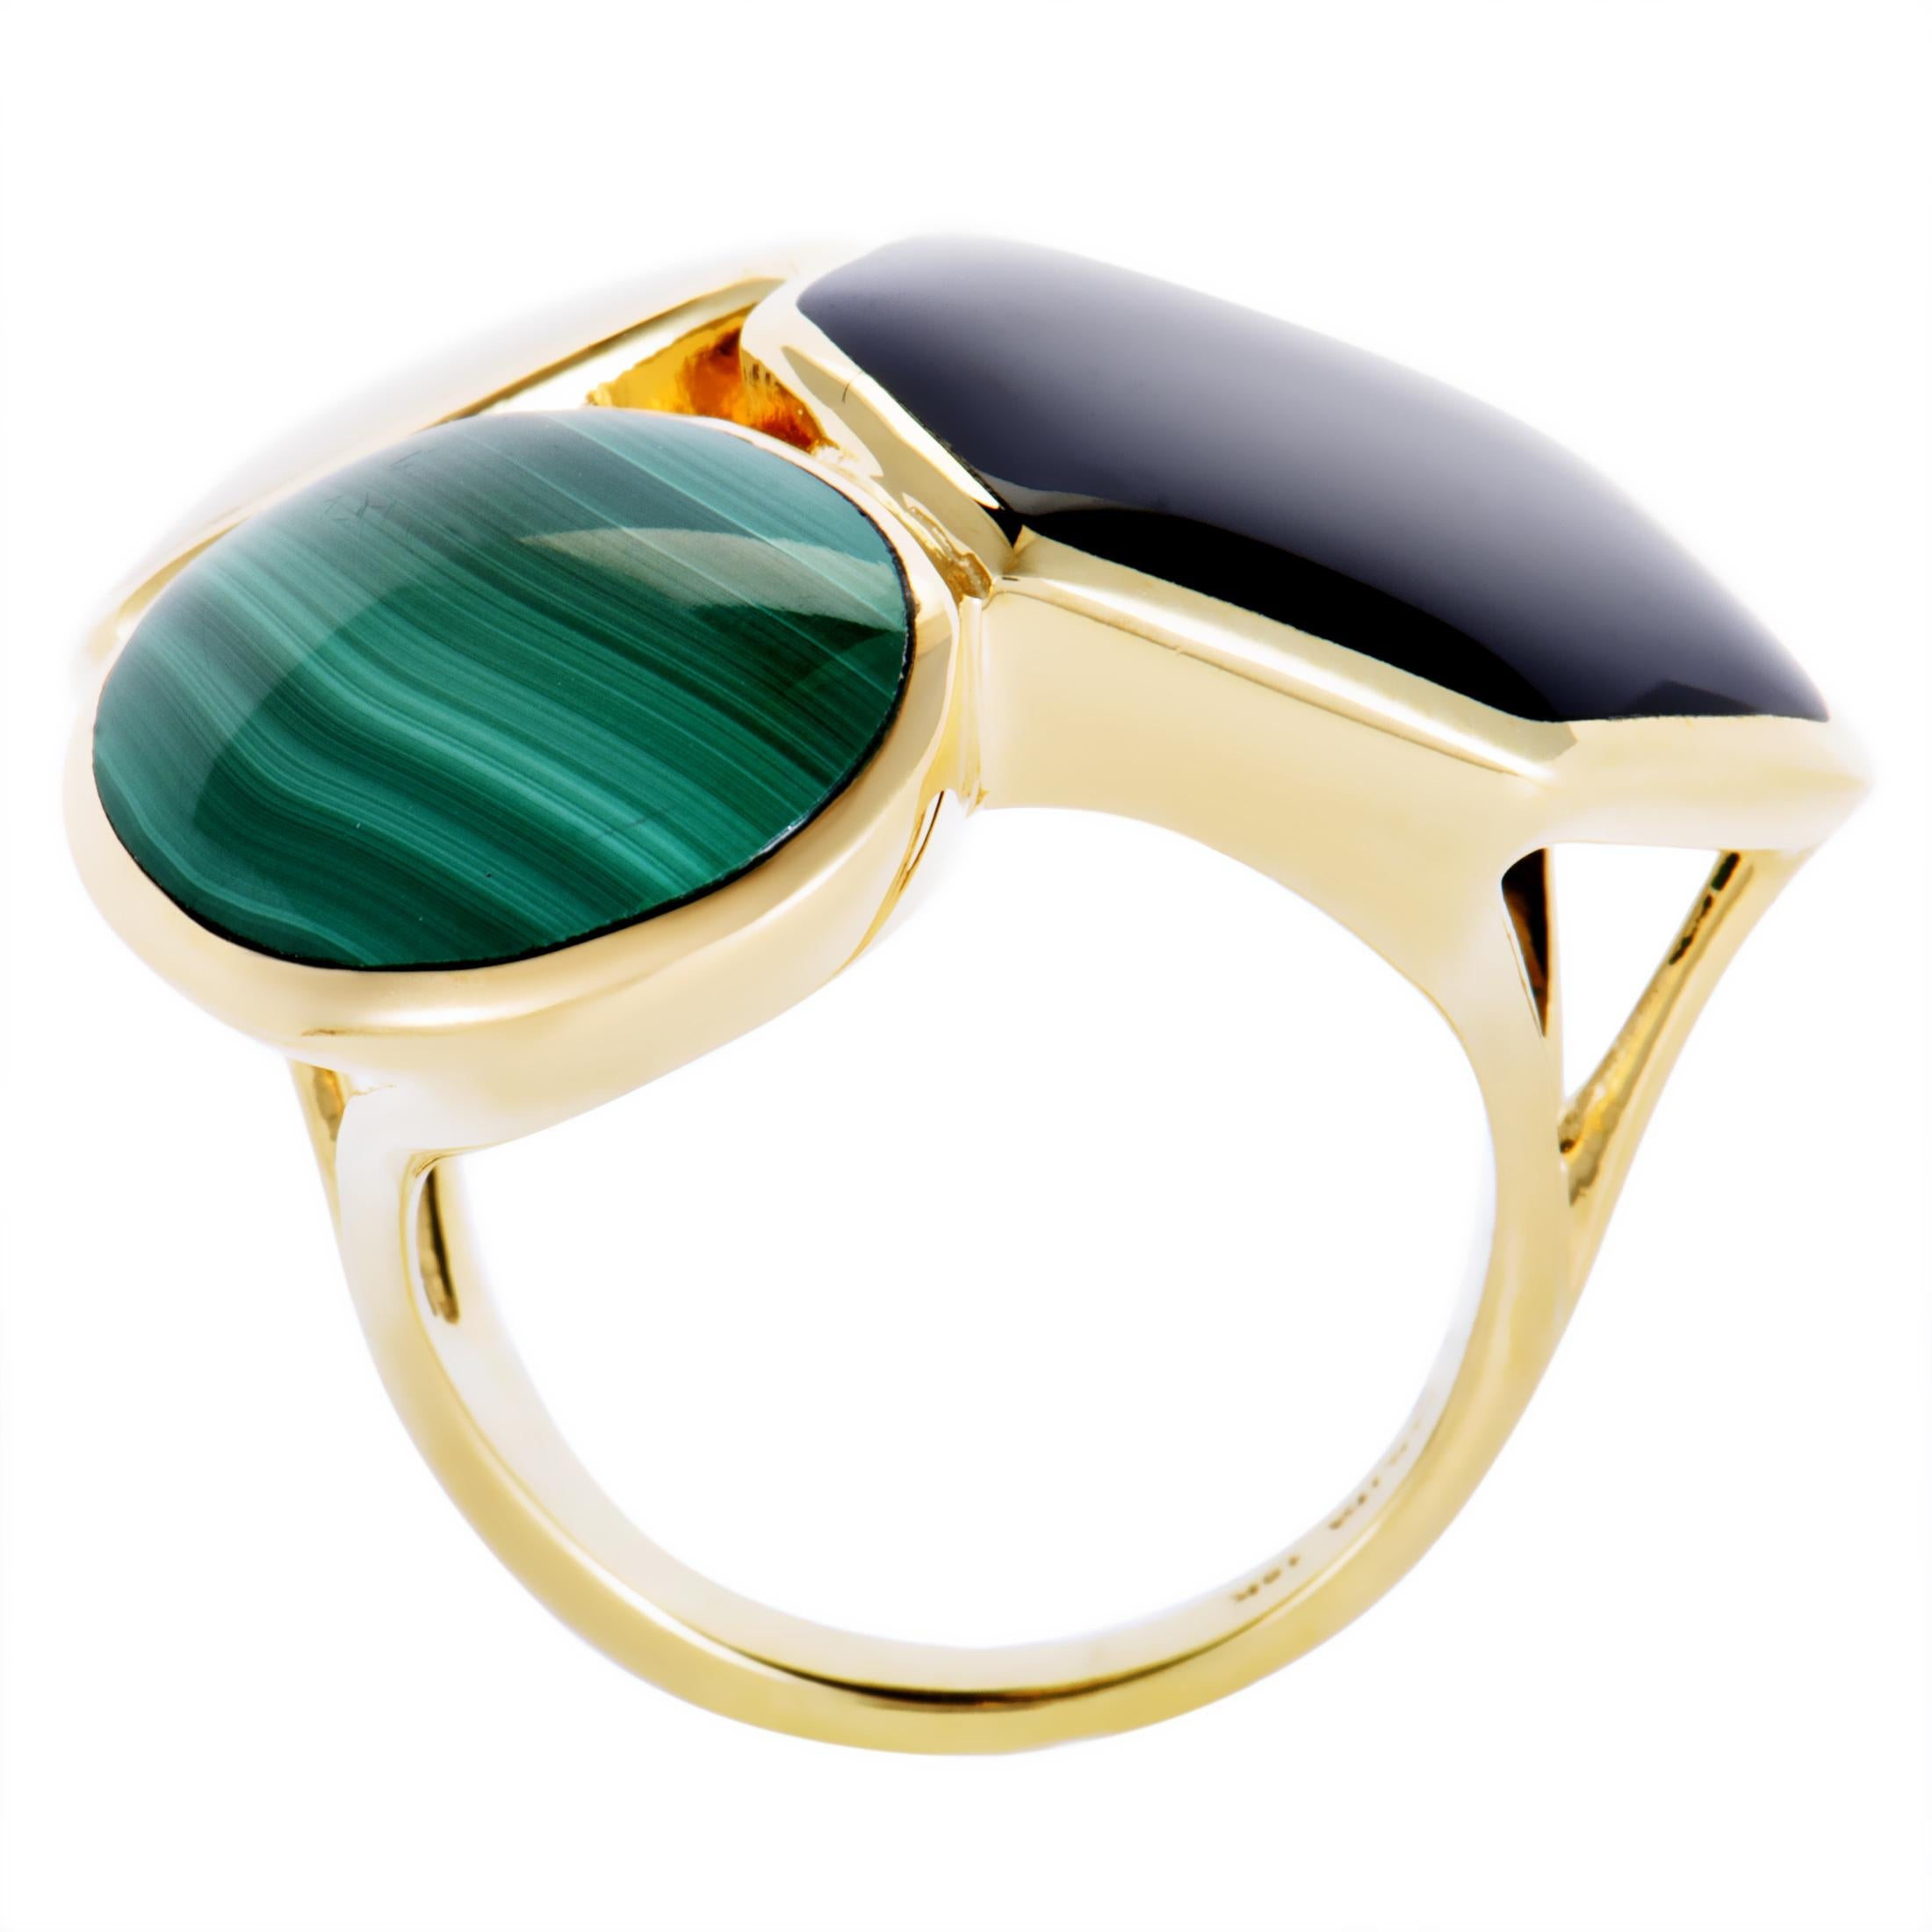 Tastefully contrasting, vivid and captivating, the diverse colors of neatly shaped gems produce an outstanding sight at the top of this majestic 18K yellow gold ring from the highly renowned “Rock Candy” collection by Ippolita.
Ring Top Dimensions: